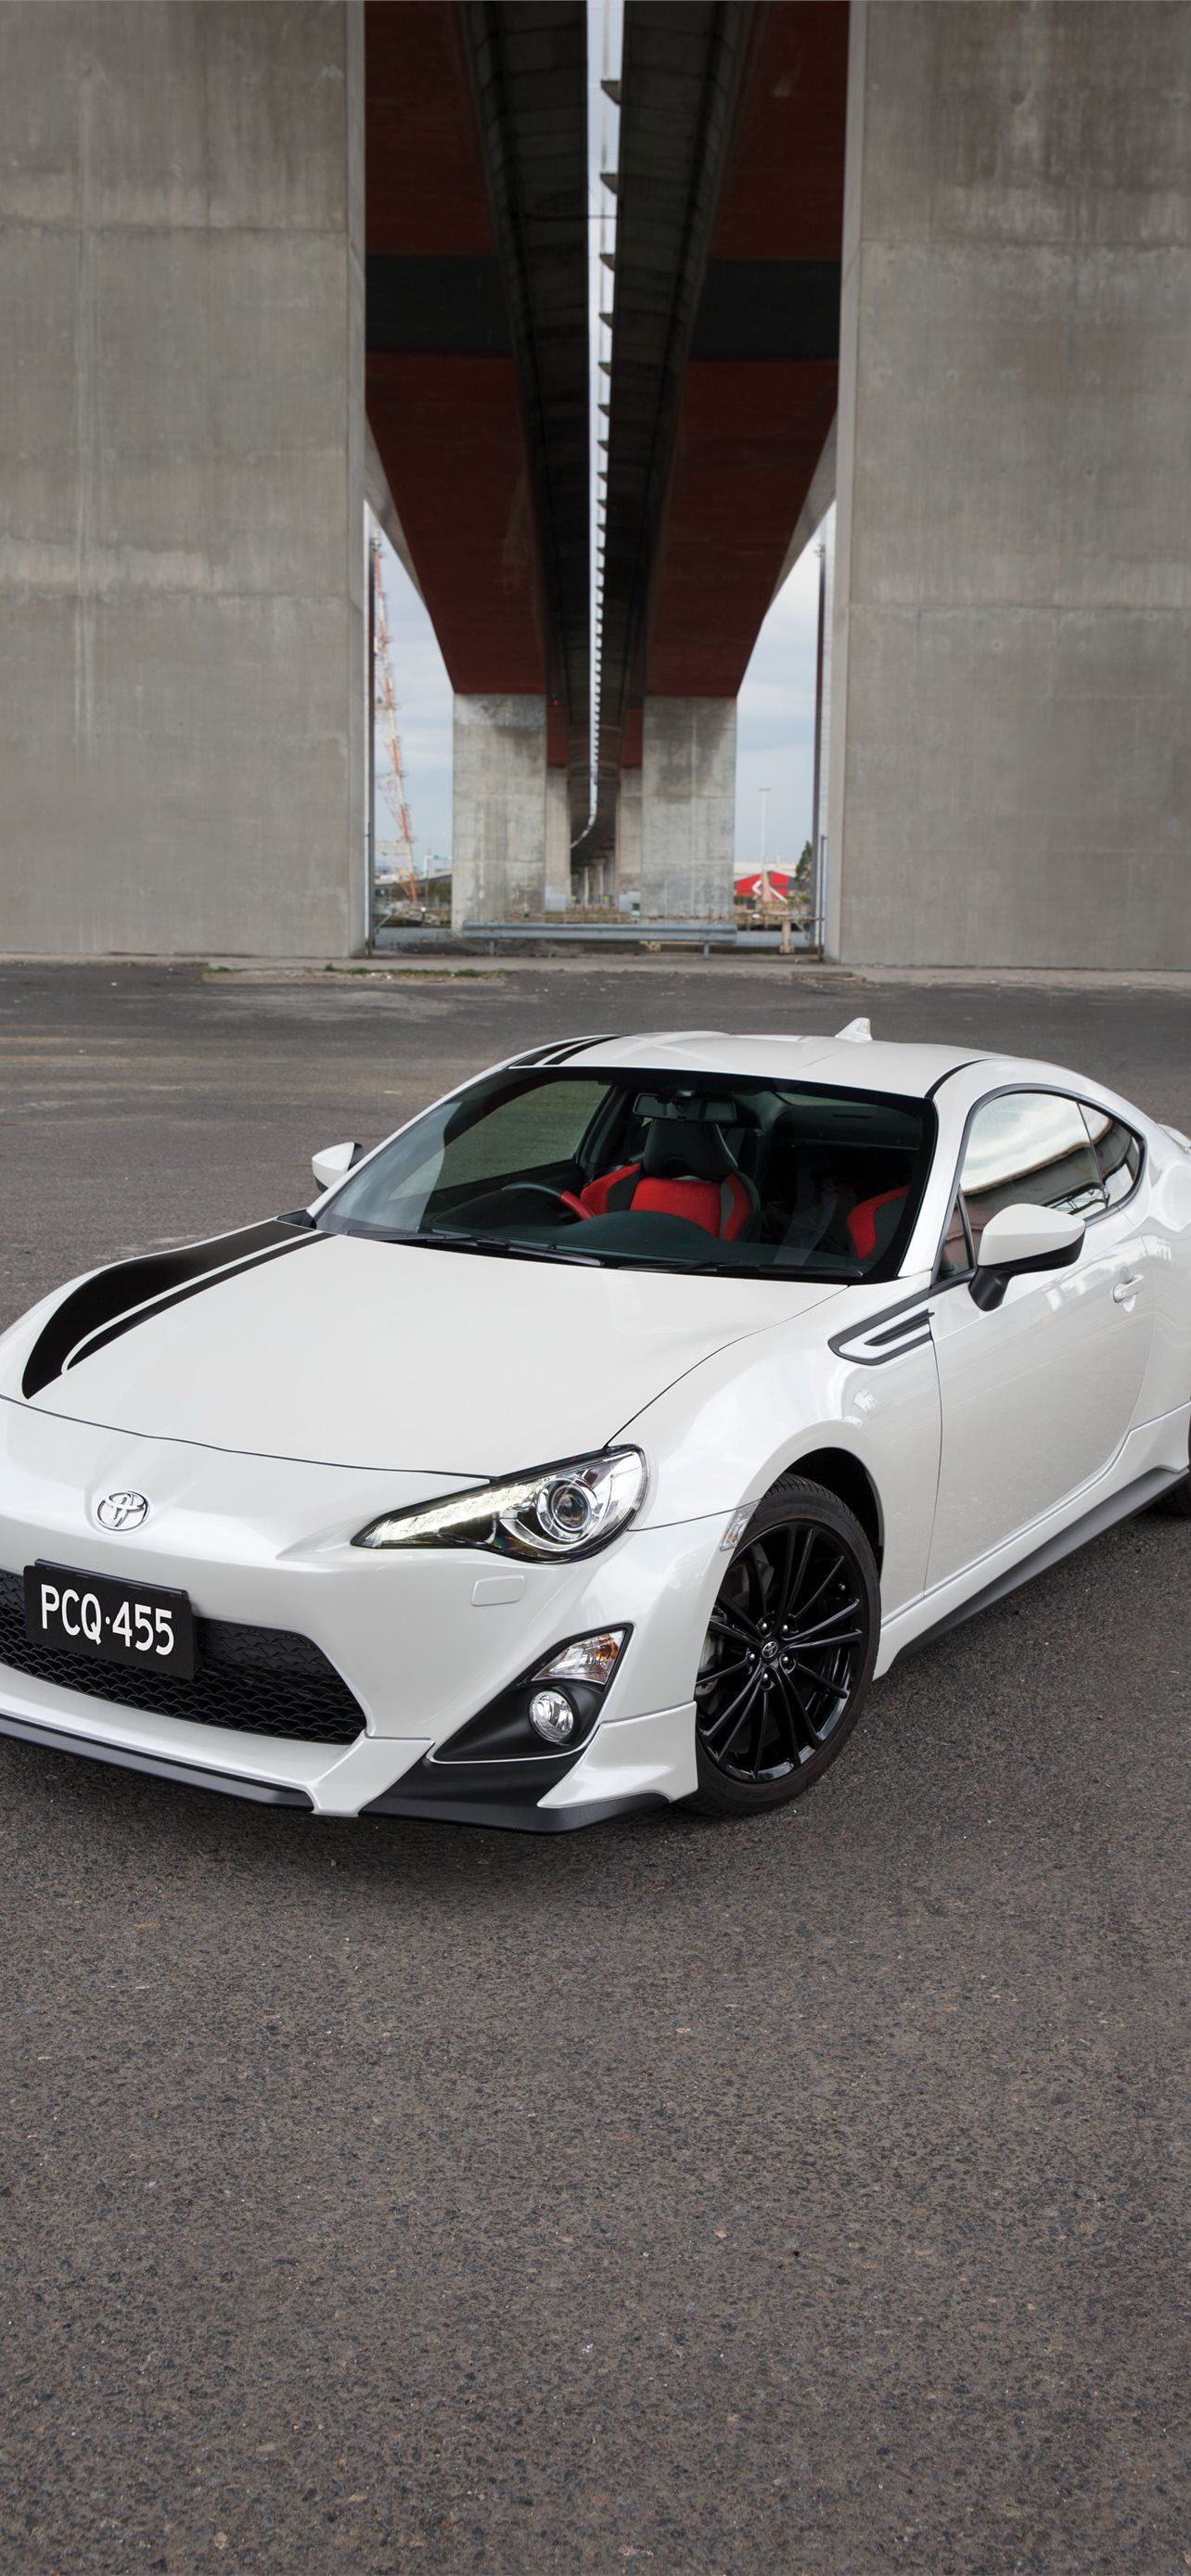 Toyota 86 Iphone Wallpapers Free Download